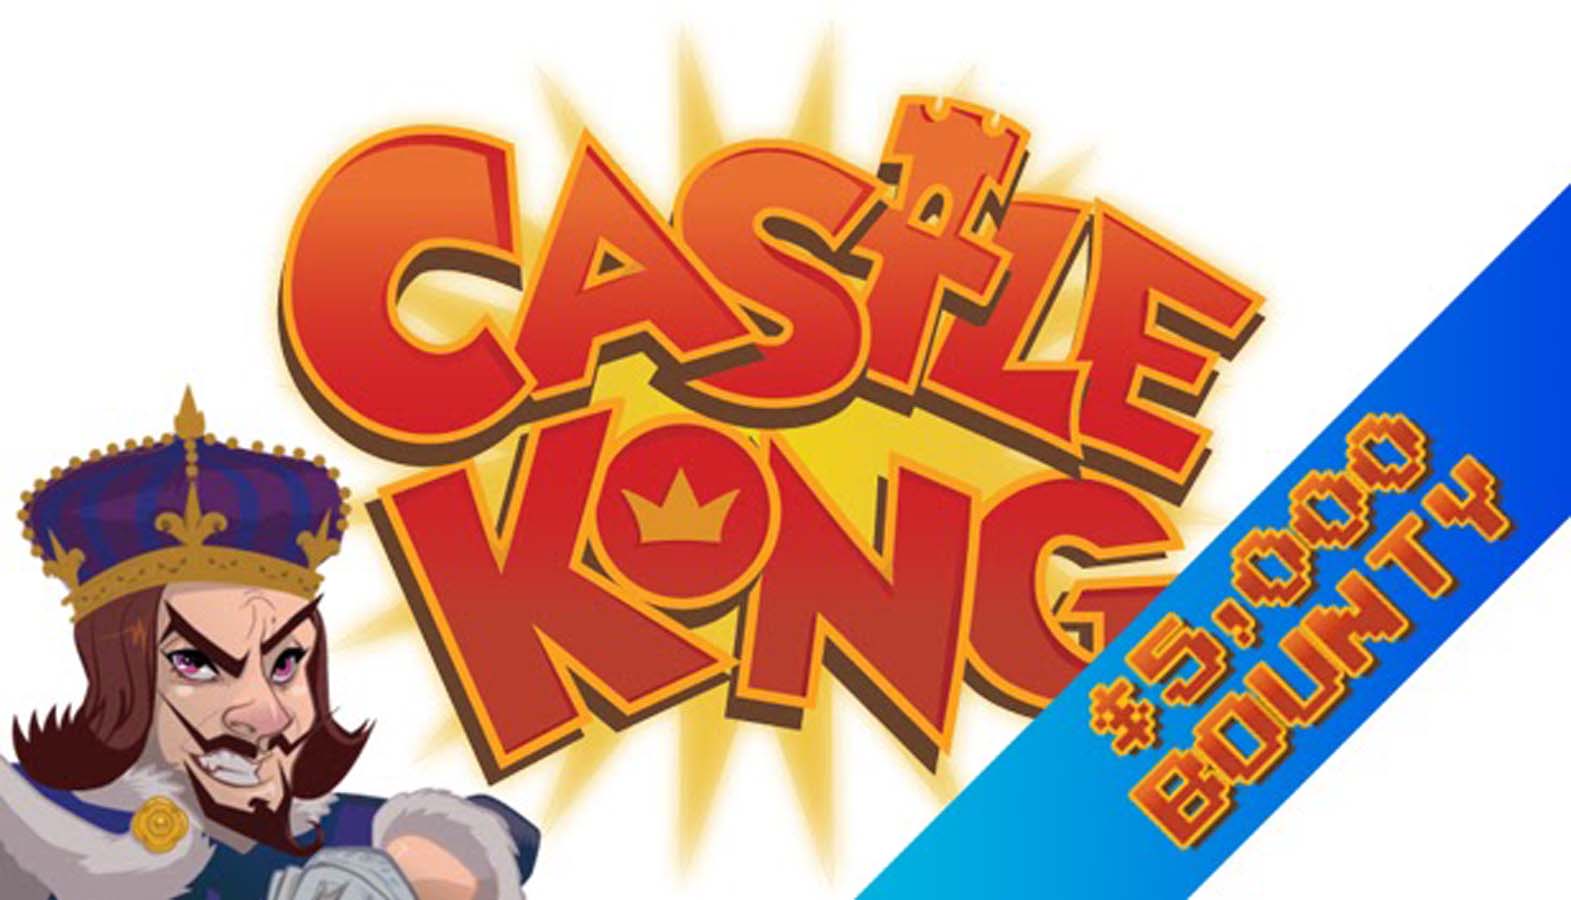 Conquer Castle Kong on PC or Switch & Win 5,000